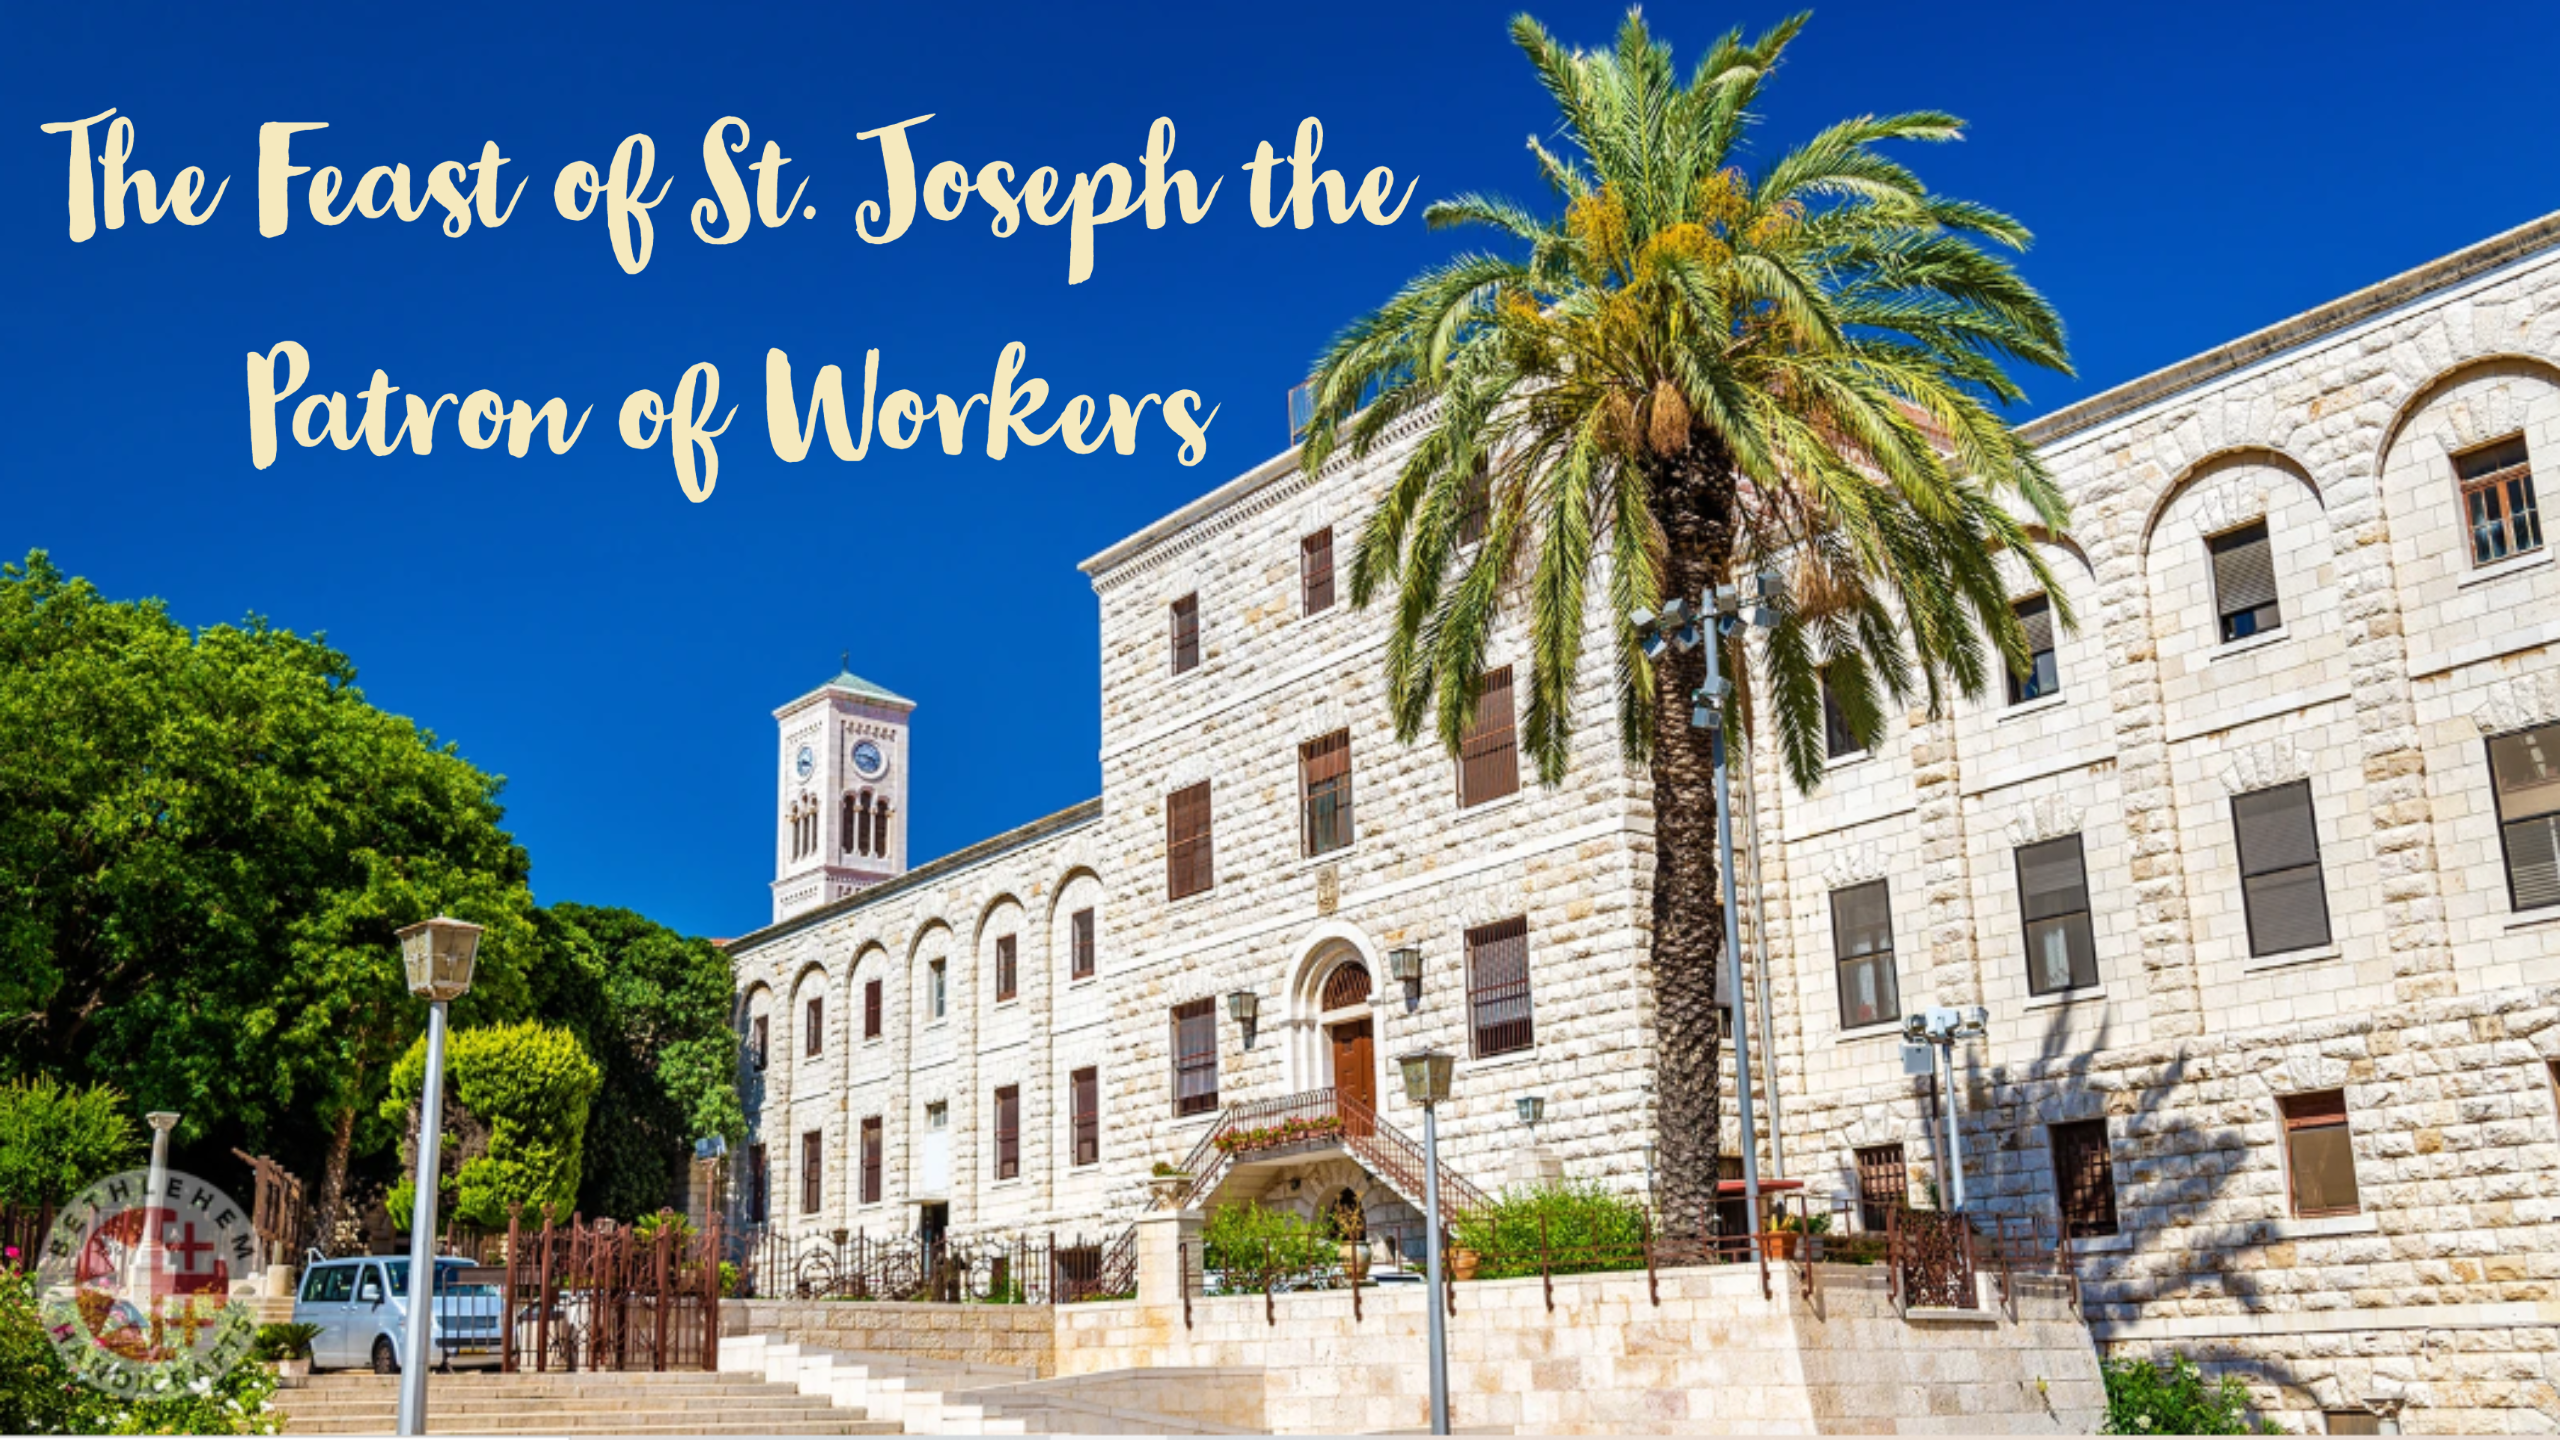 The Feast of St. Joseph the Patron of Workers